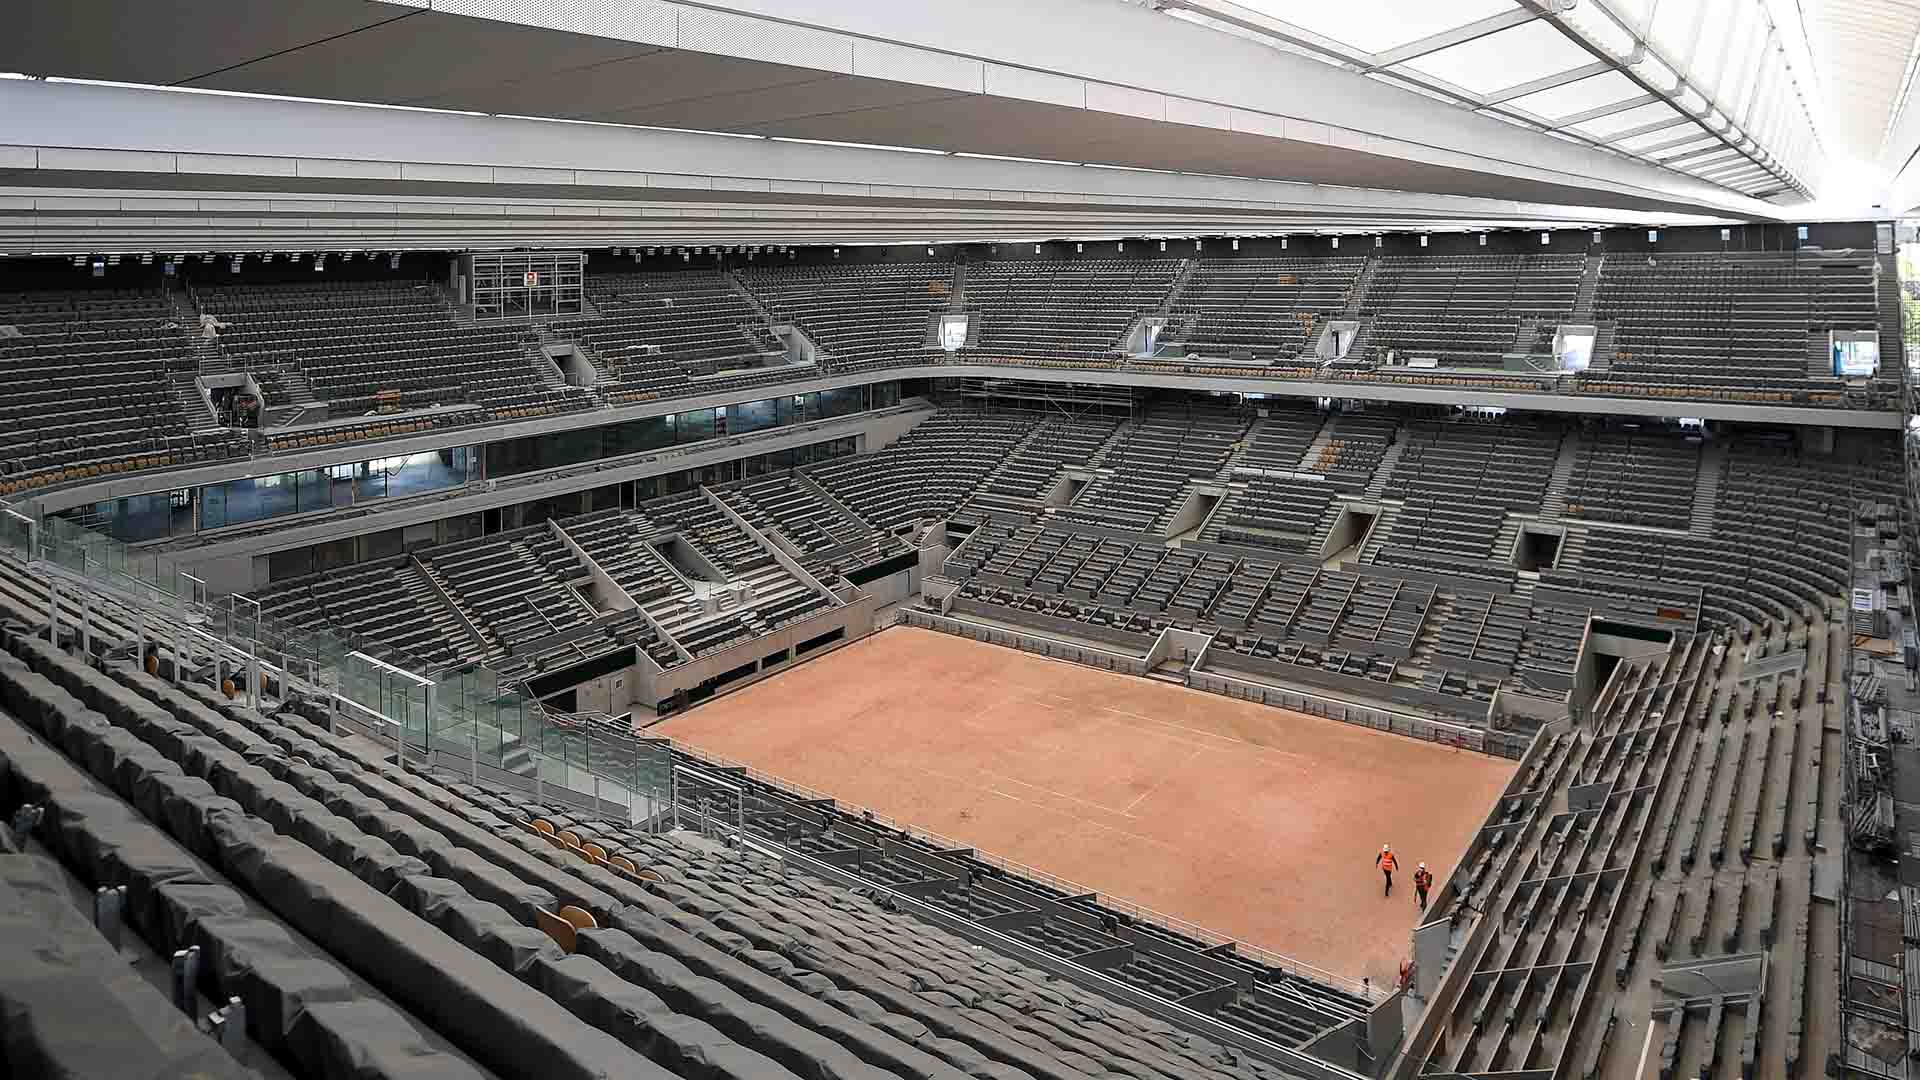 Roland Garros will take place from 27 September to 11 October this year.